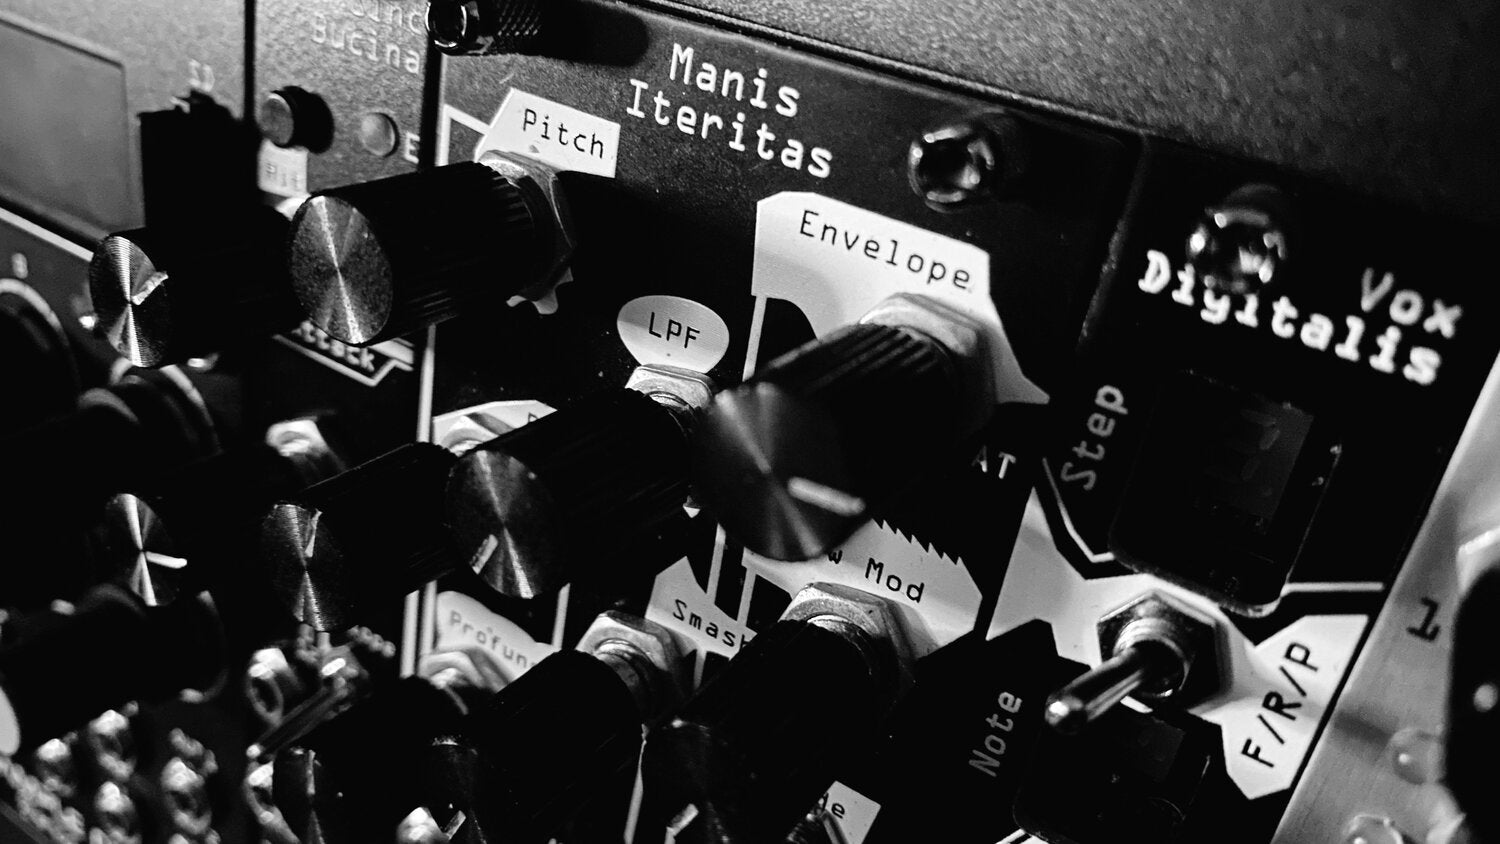 Black and white image is a close-up showing the Noise Engineering modules Manis Iteritas and Vox Digitalis in a case